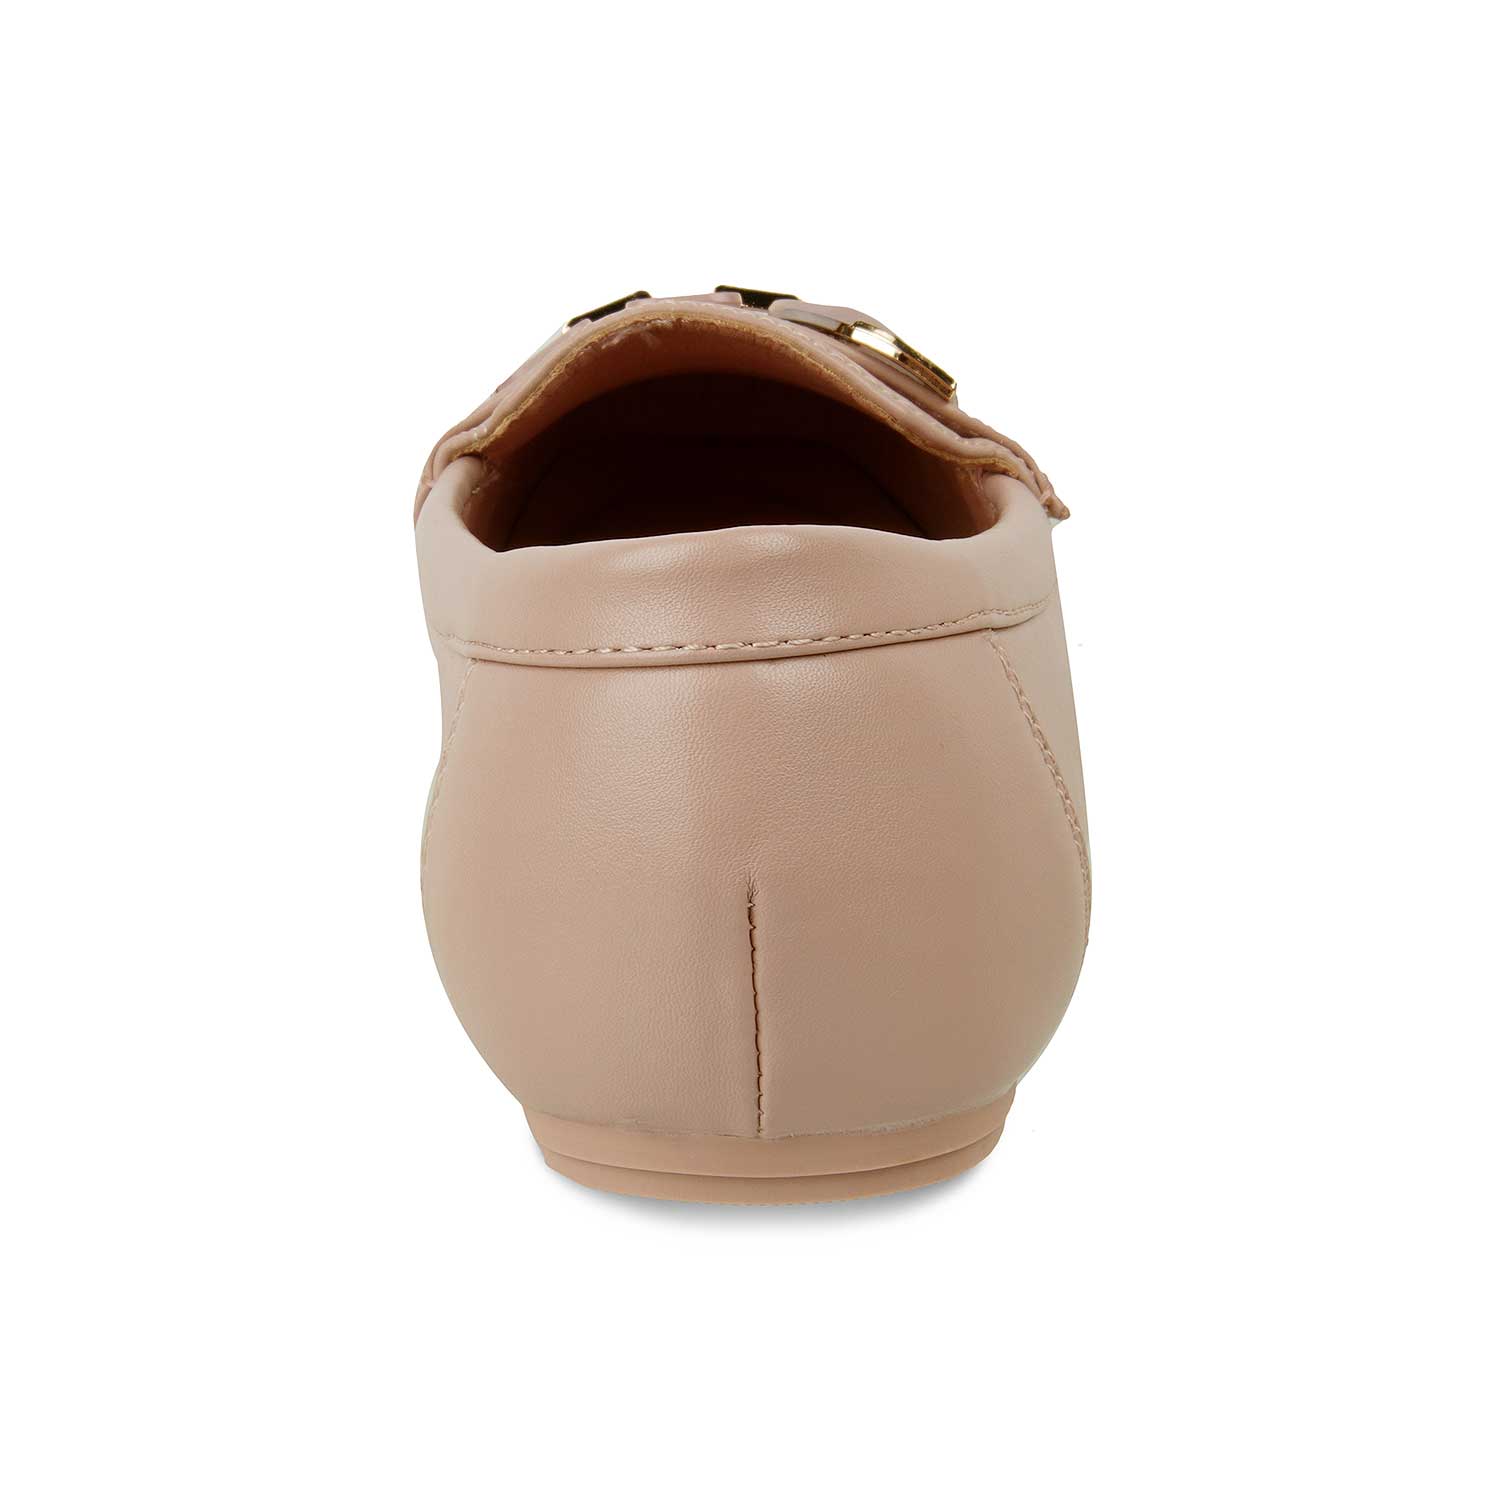 The Miko Beige Women's Dress Loafers Tresmode